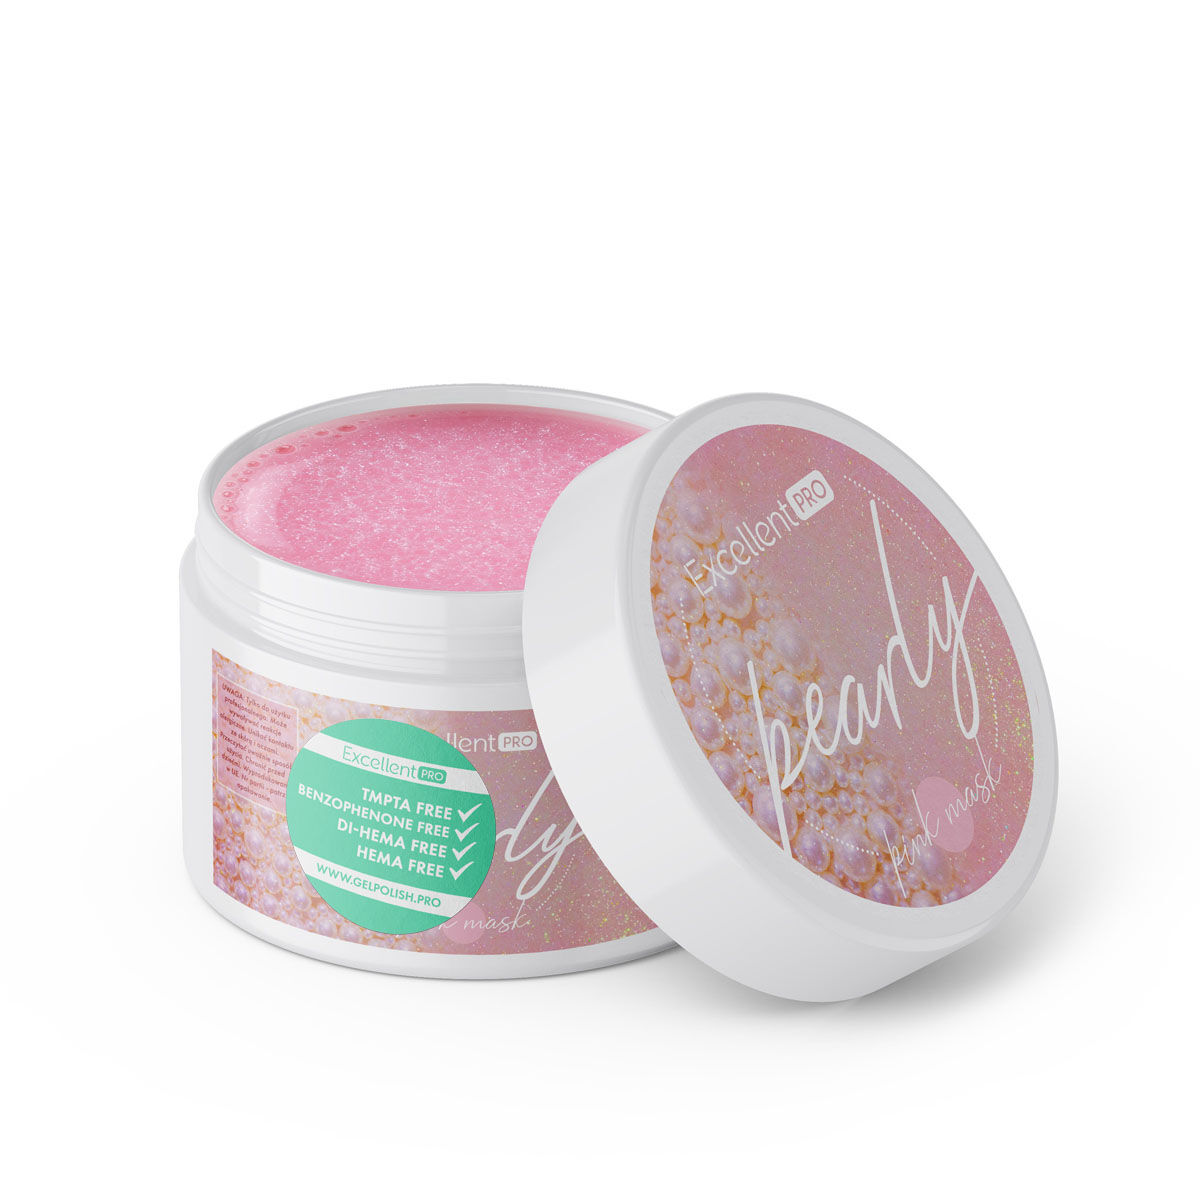 Excellent PRO Pearly Gel Pink Mask 15g